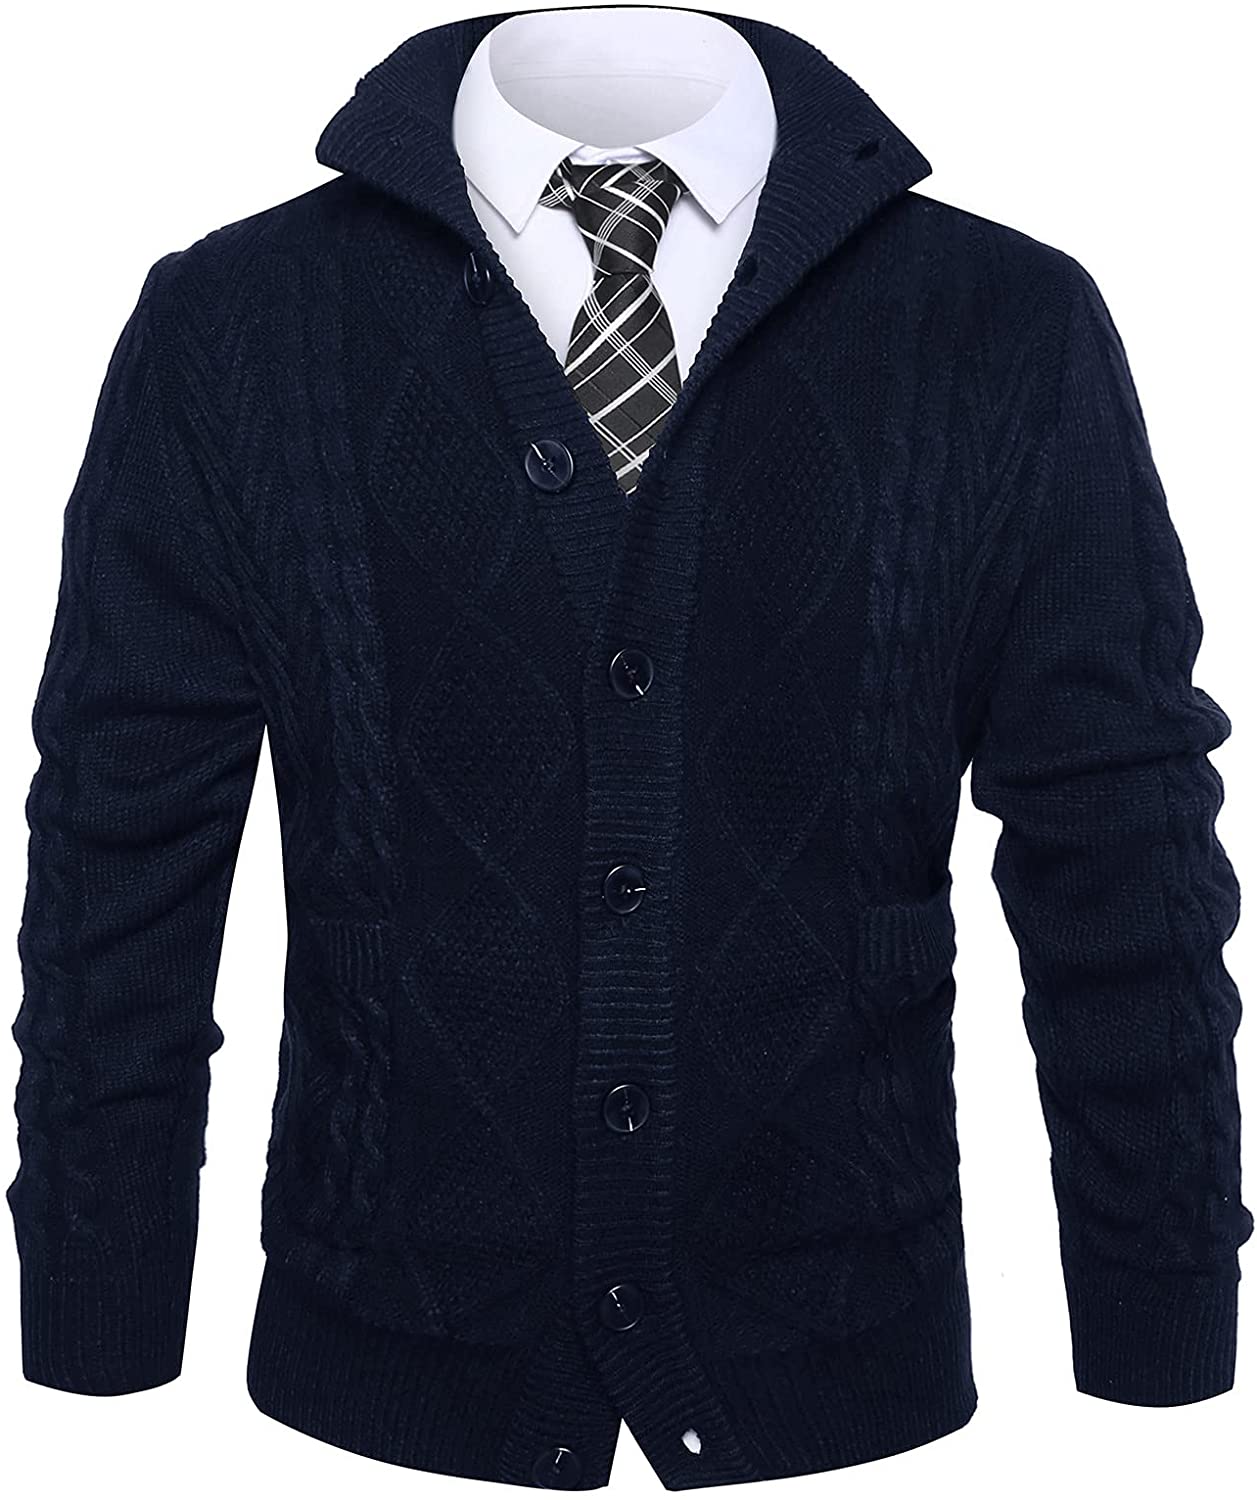 Neufigr Mens Casual Stand Collar Cardigan Stylish Button Down Knitted Sweater with Pockets